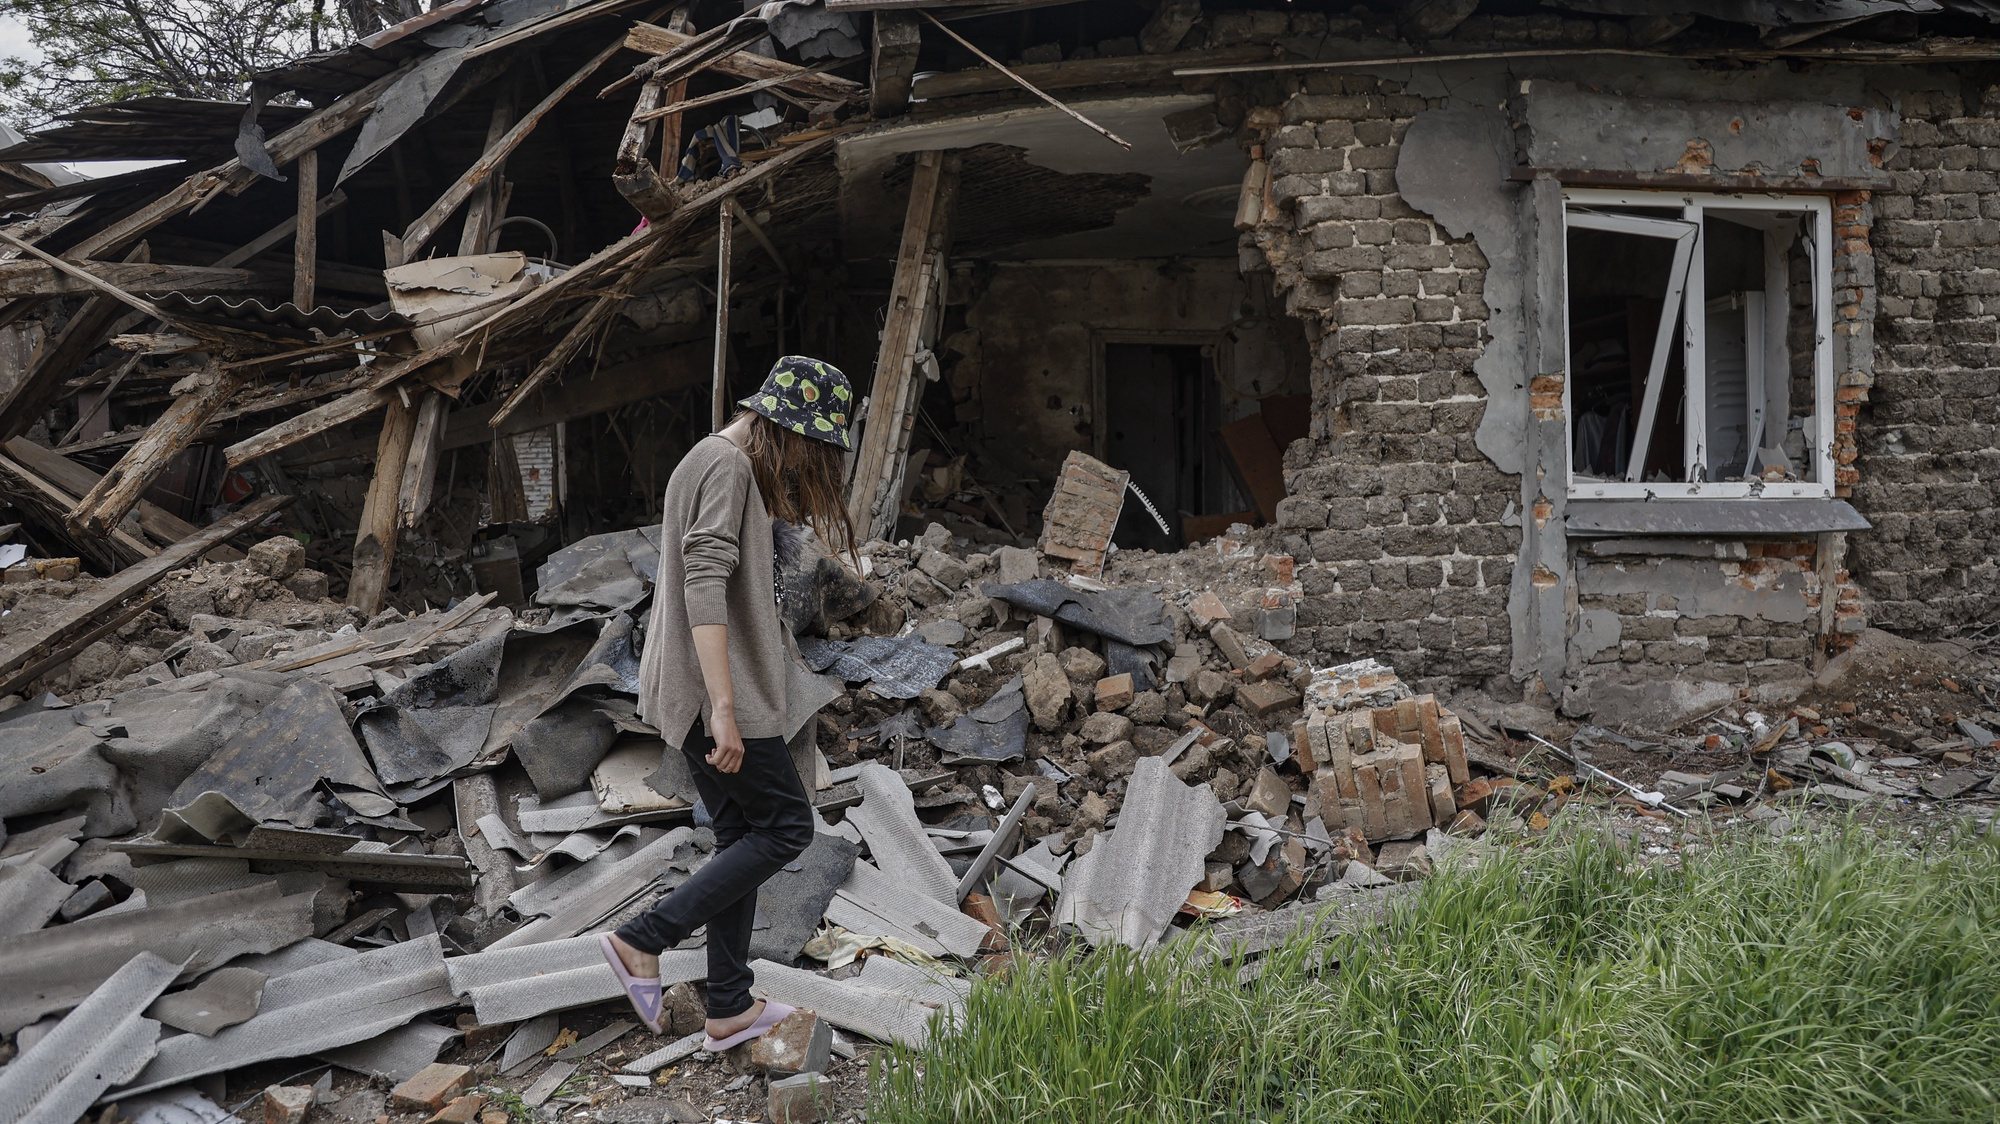 epa09965027 A woman walks past her destroyed house in Mariupol, Ukraine, 21 May 2022 (issued 22 May 2022). According to the Head of the self-proclaimed Donetsk People&#039;s Republic Denis Pushilin, 60 percent of the houses in Mariupol were destroyed, 20 percent of which cannot be rebuilt. The Chief spokesman of the Russian Defense Ministry, Major General Igor Konashenkov, said on 20 May that the long-besieged Azovstal steel plant in Mariupol was under full Russian army control.  EPA/ALESSANDRO GUERRA